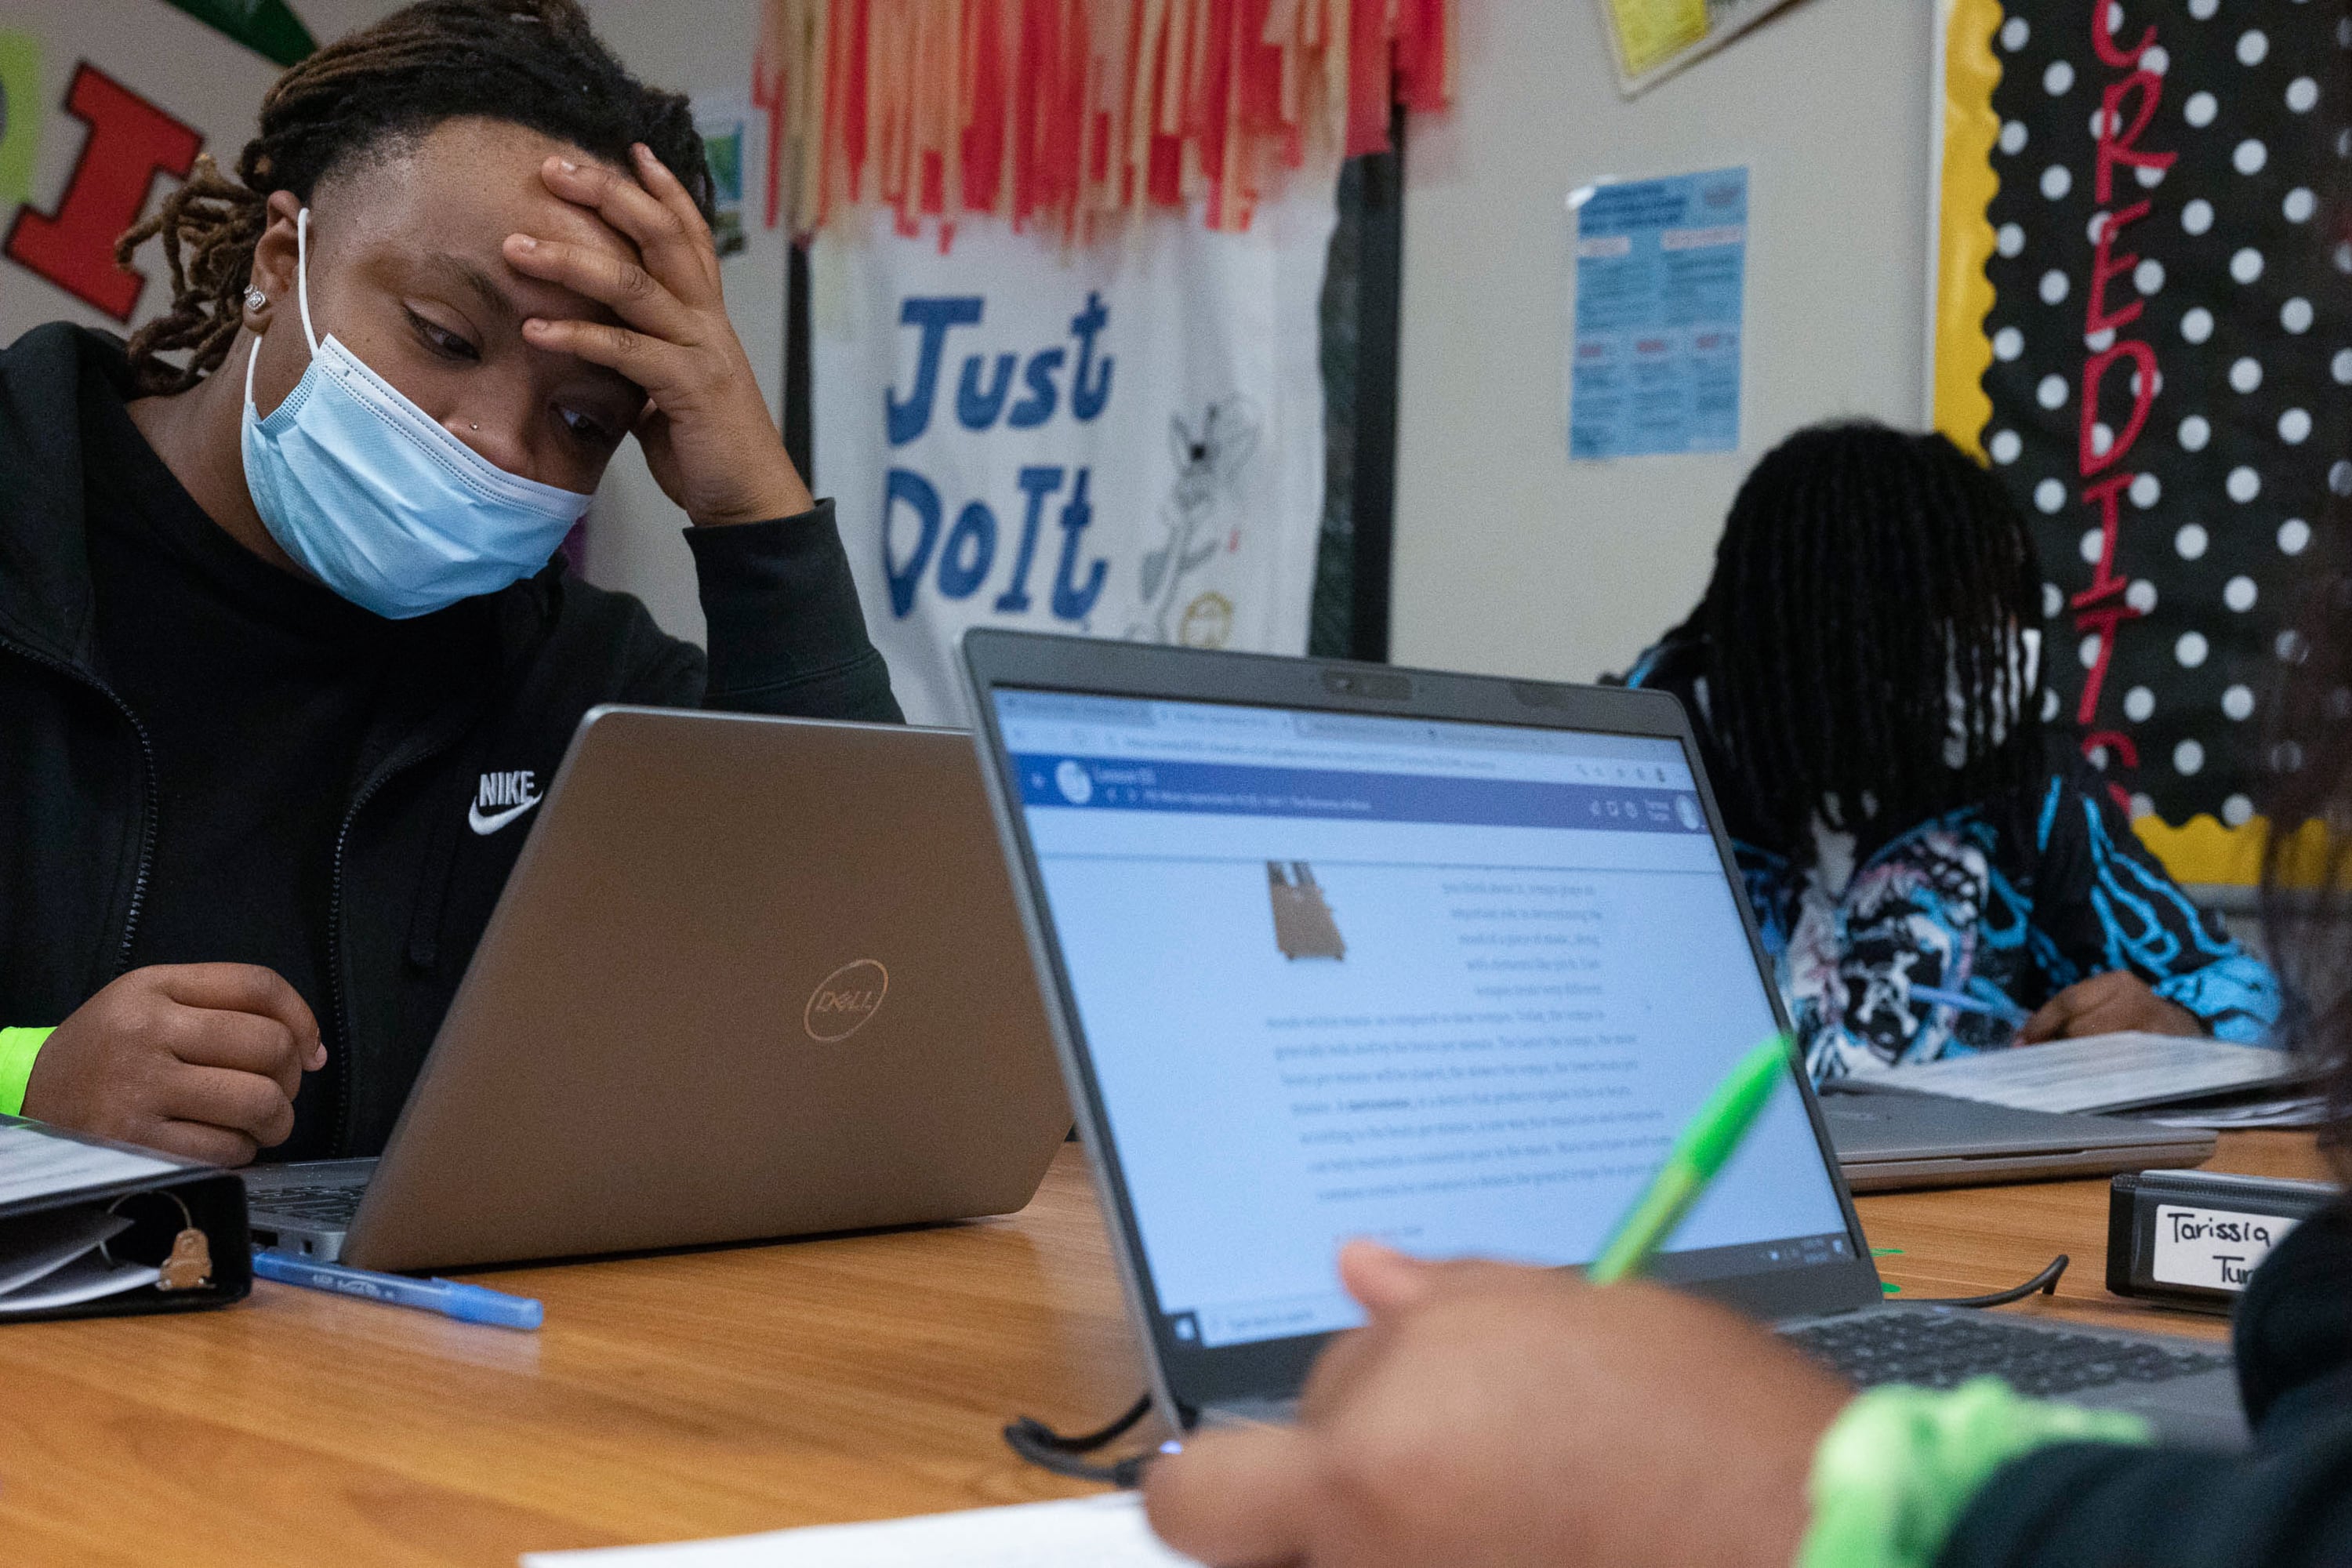 A student at Ombudsman Chicago South works on a Chromebook during the first day of school in August 2021.